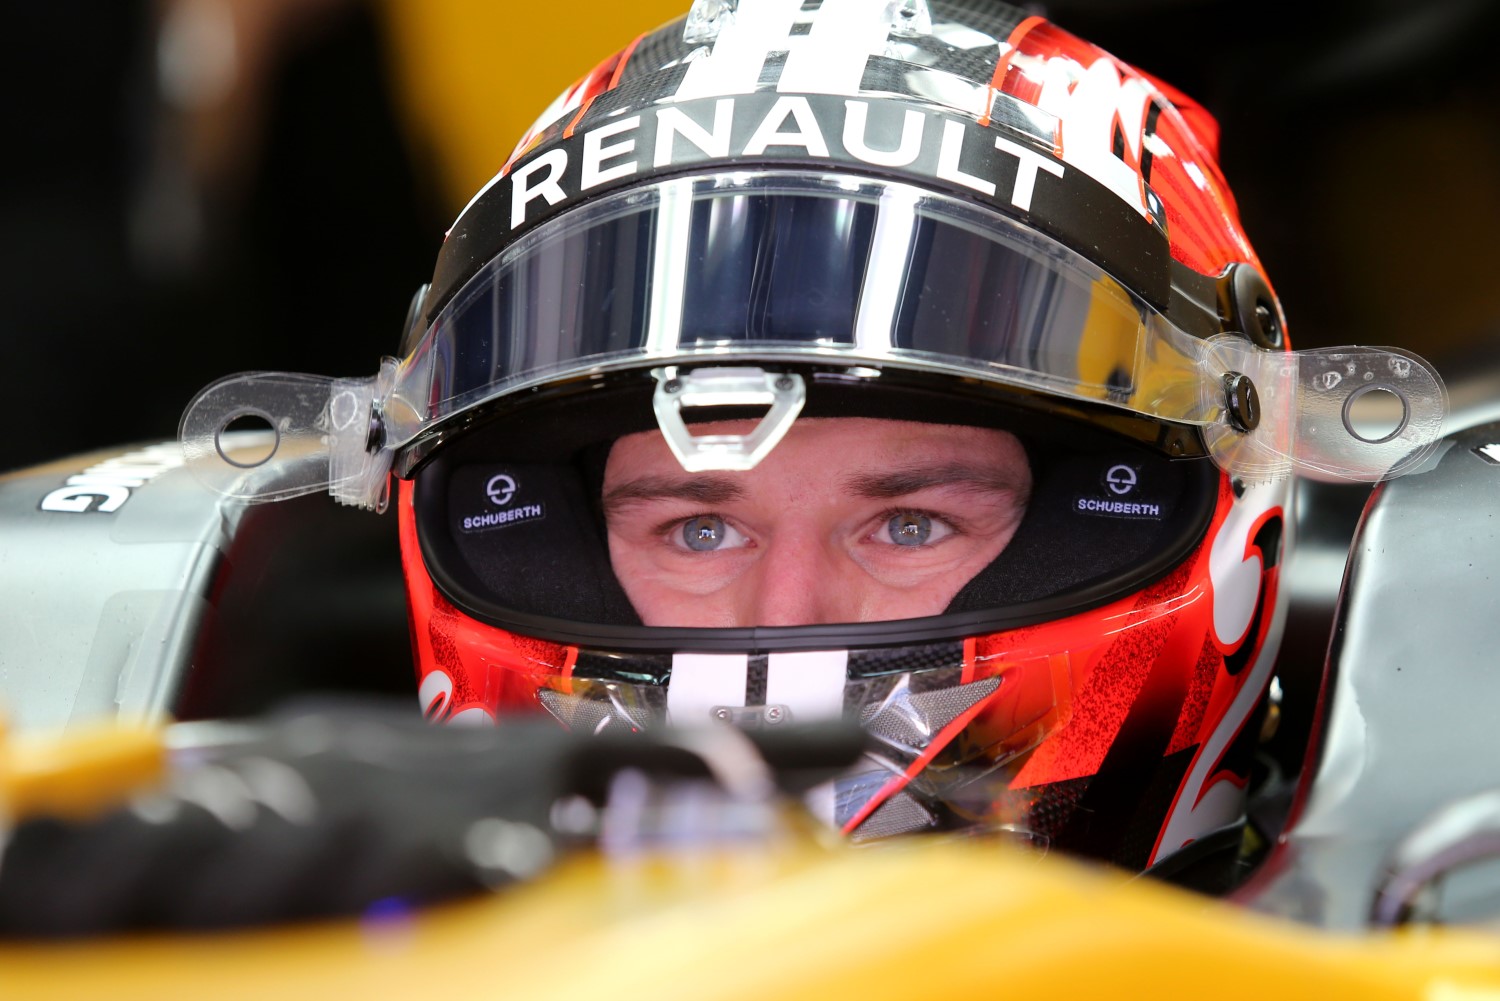 No regrets says Hulkenberg even though he is now in a slower car